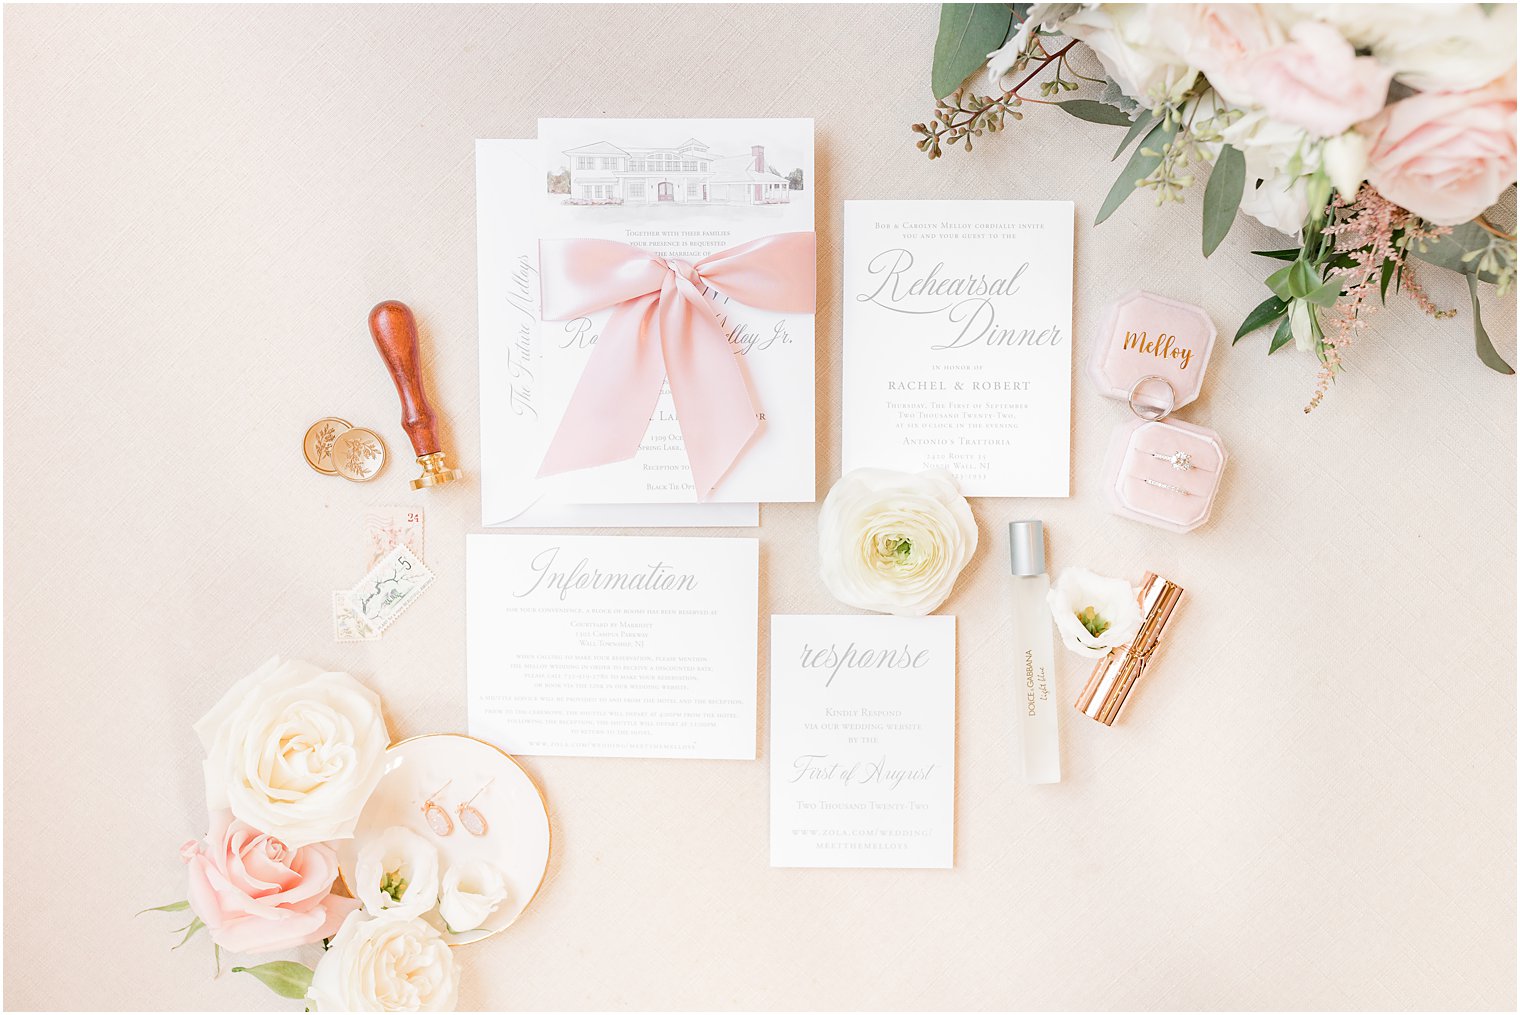 fall invitation suite with pink and white details by Suite Scape Design